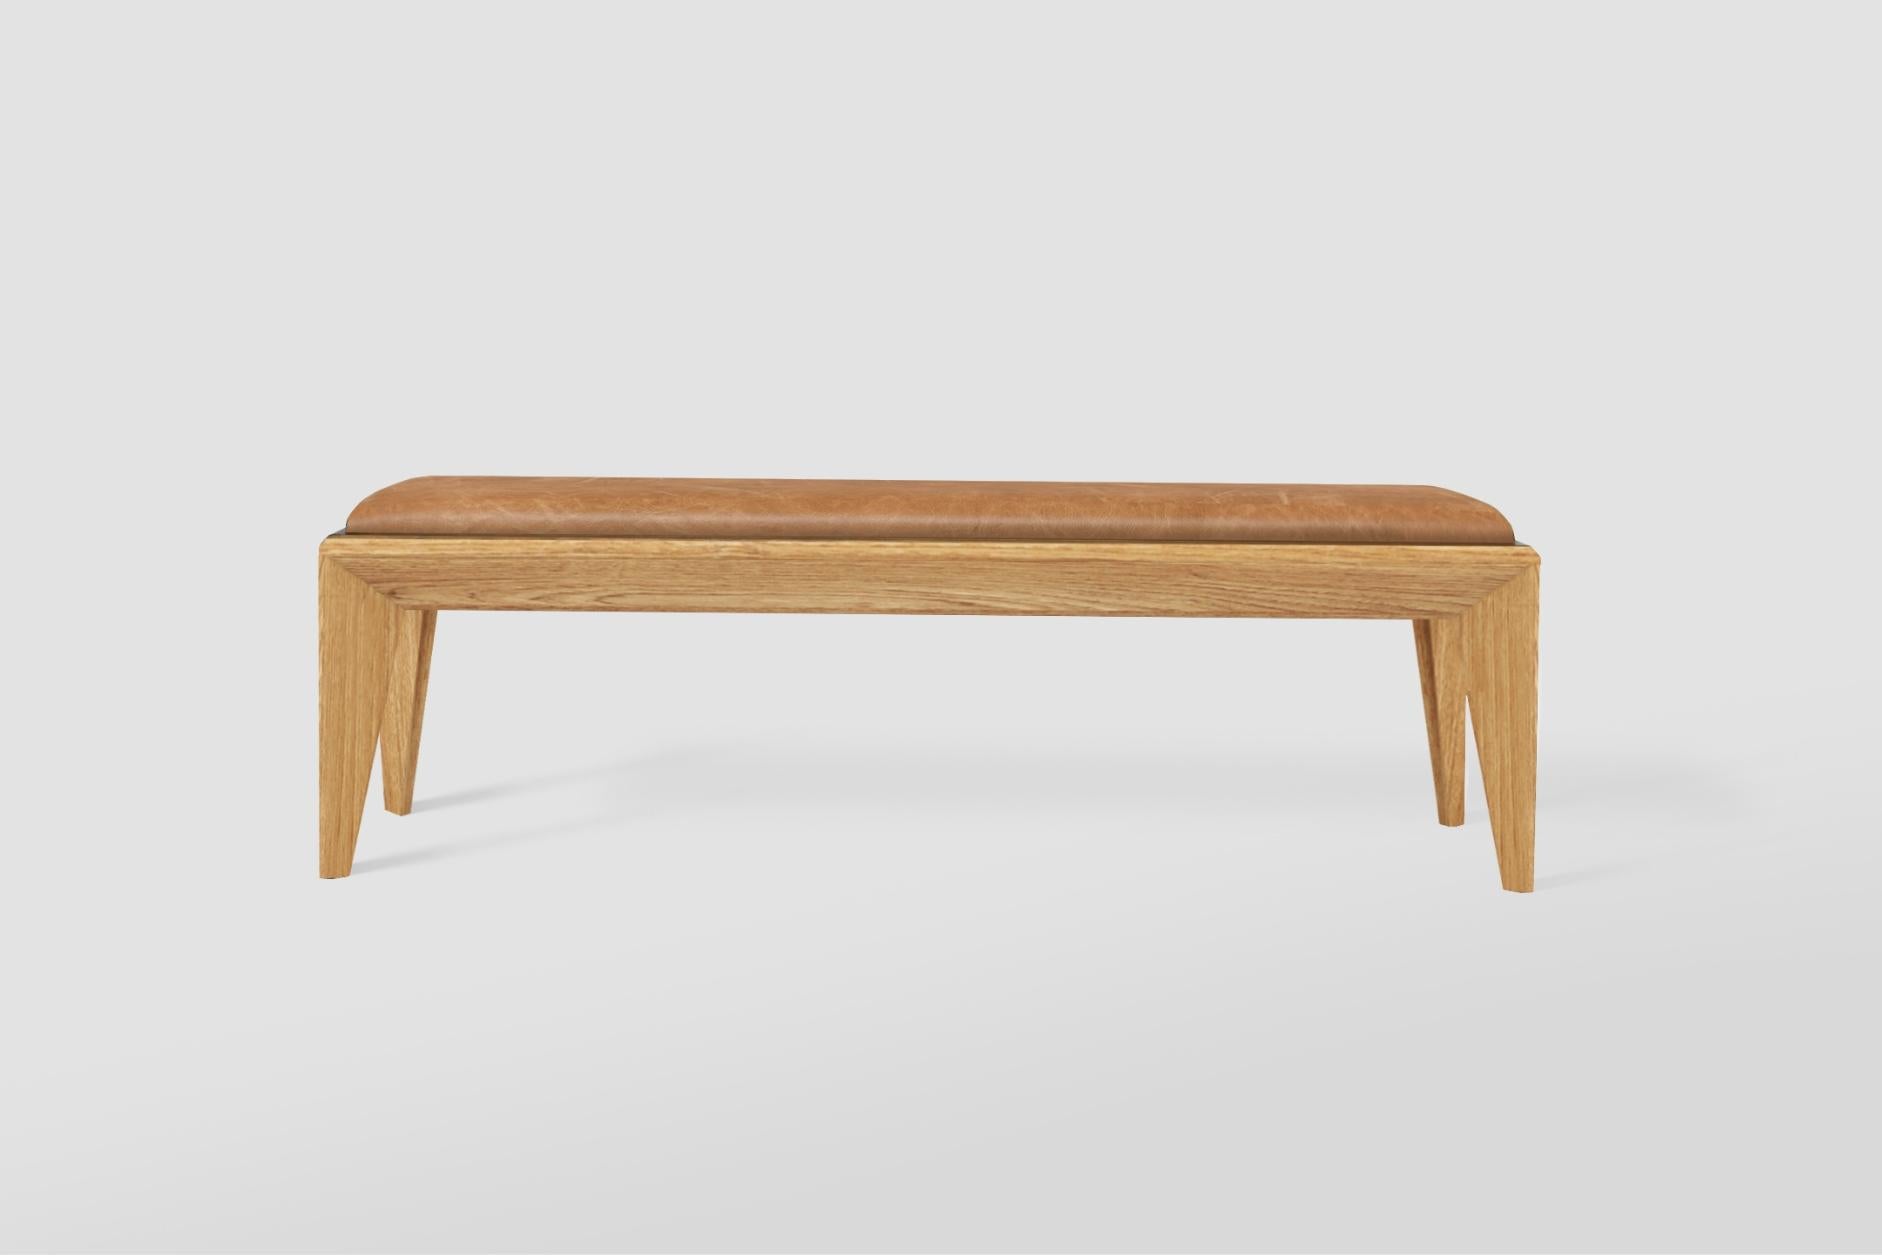 Woodwork Volpi bench in natural wood and fabric seat For Sale